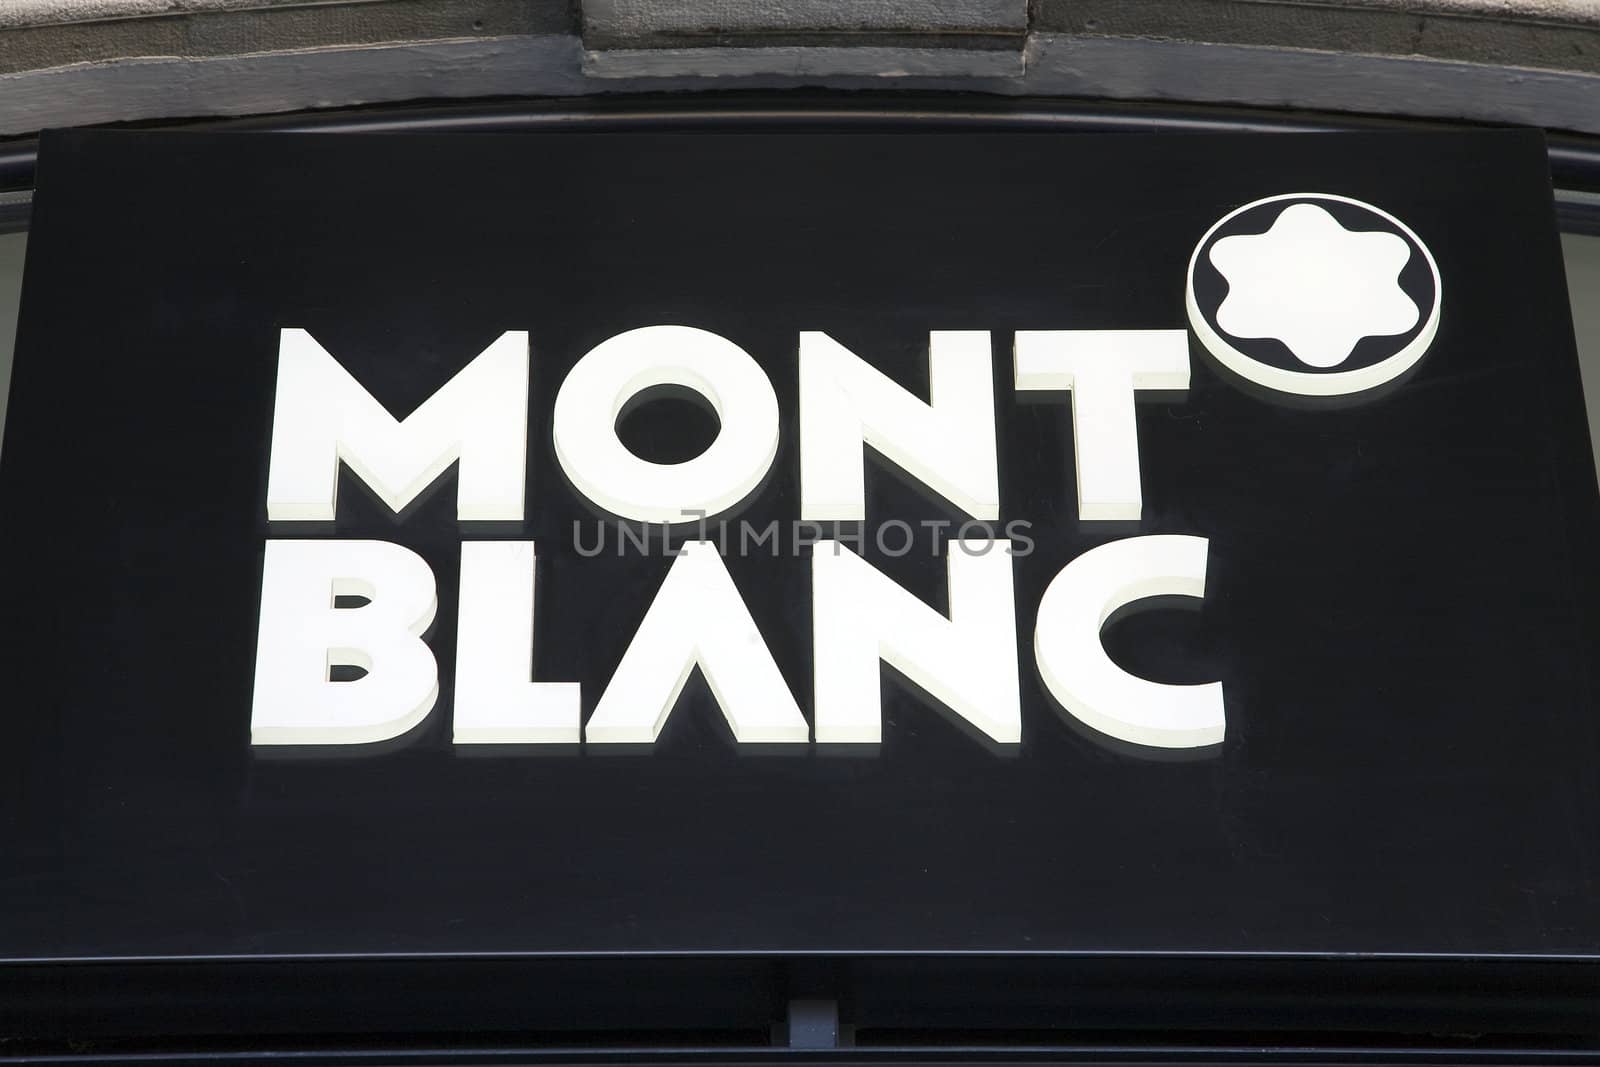 Montblanc is the maker of high quality writing pens.  Today the Montblanc brand is on other goods besides pens, including watches, jewel, fragrance, leather goods and eye-wear.